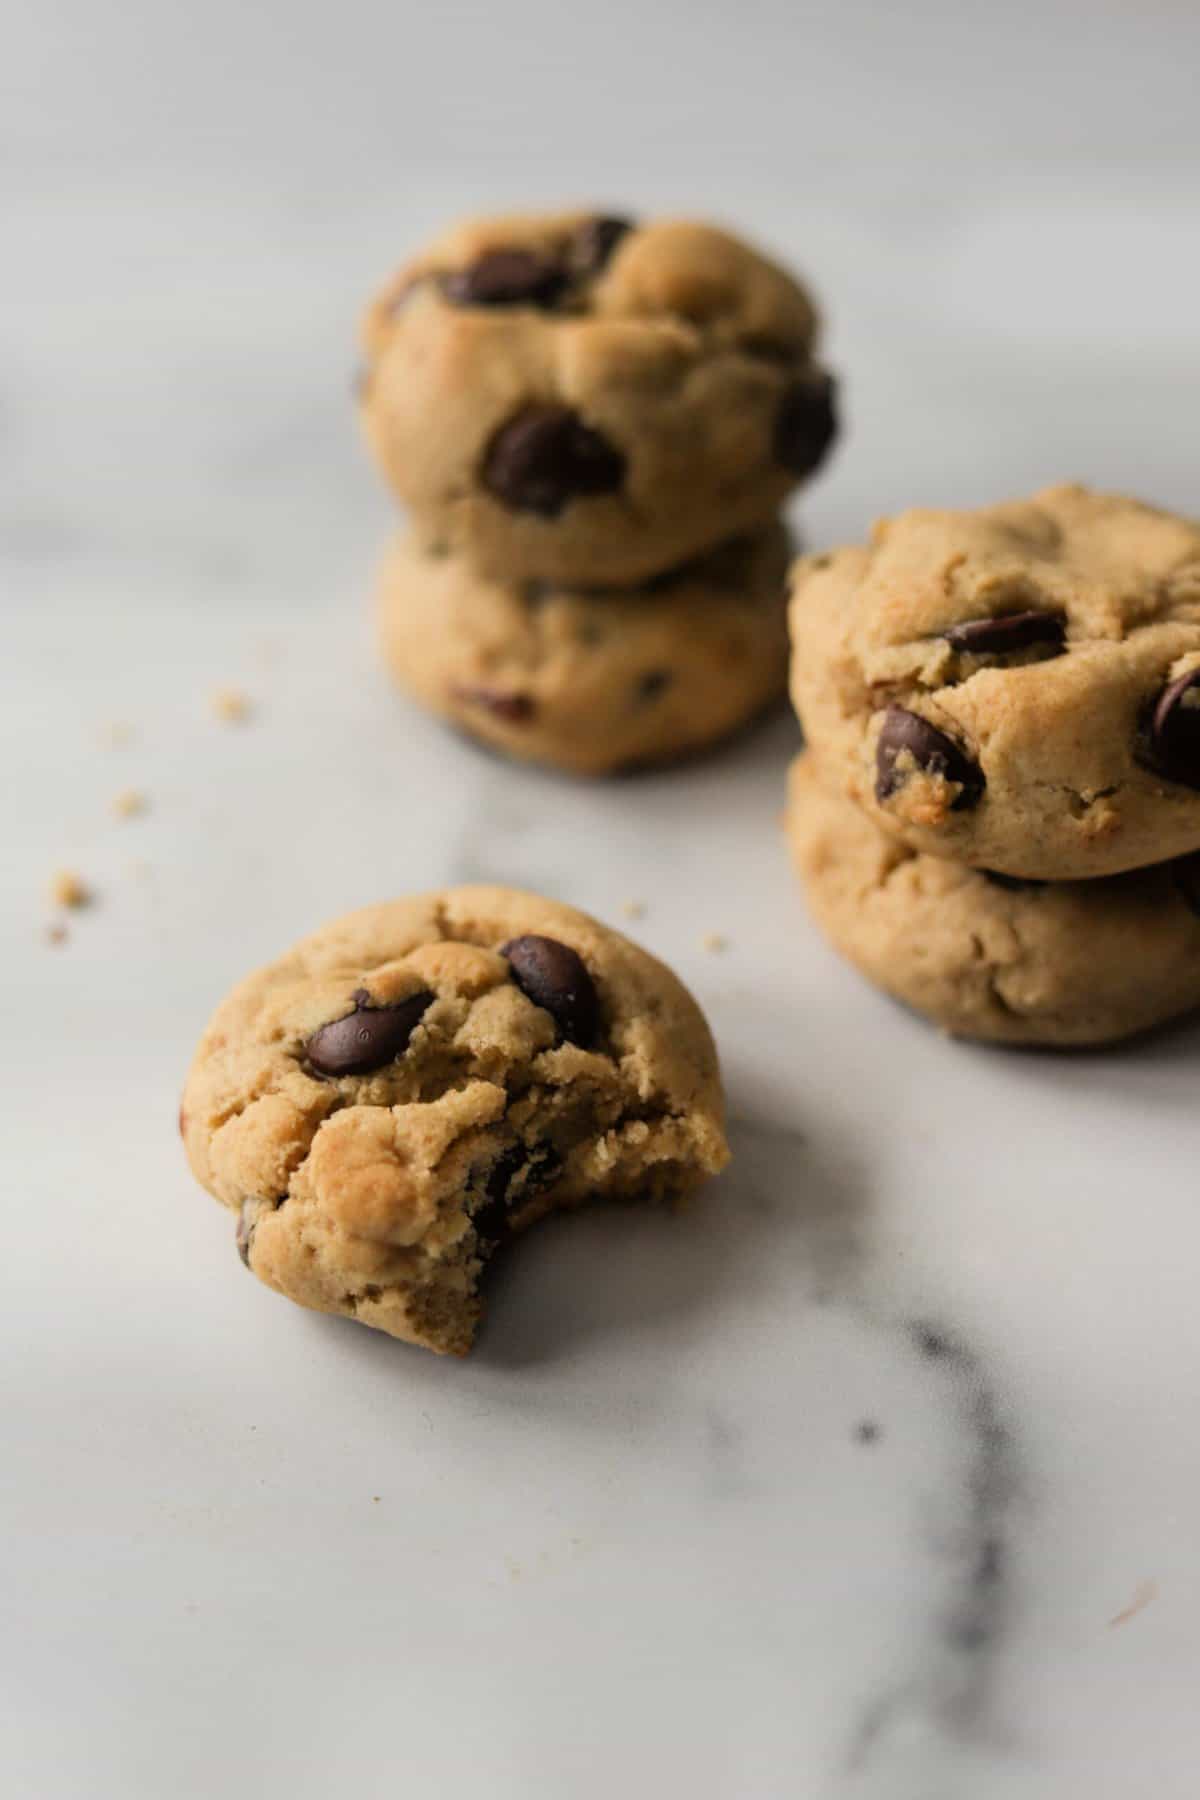 A side shot of stacked chocolate chip cookies and one off on its own.